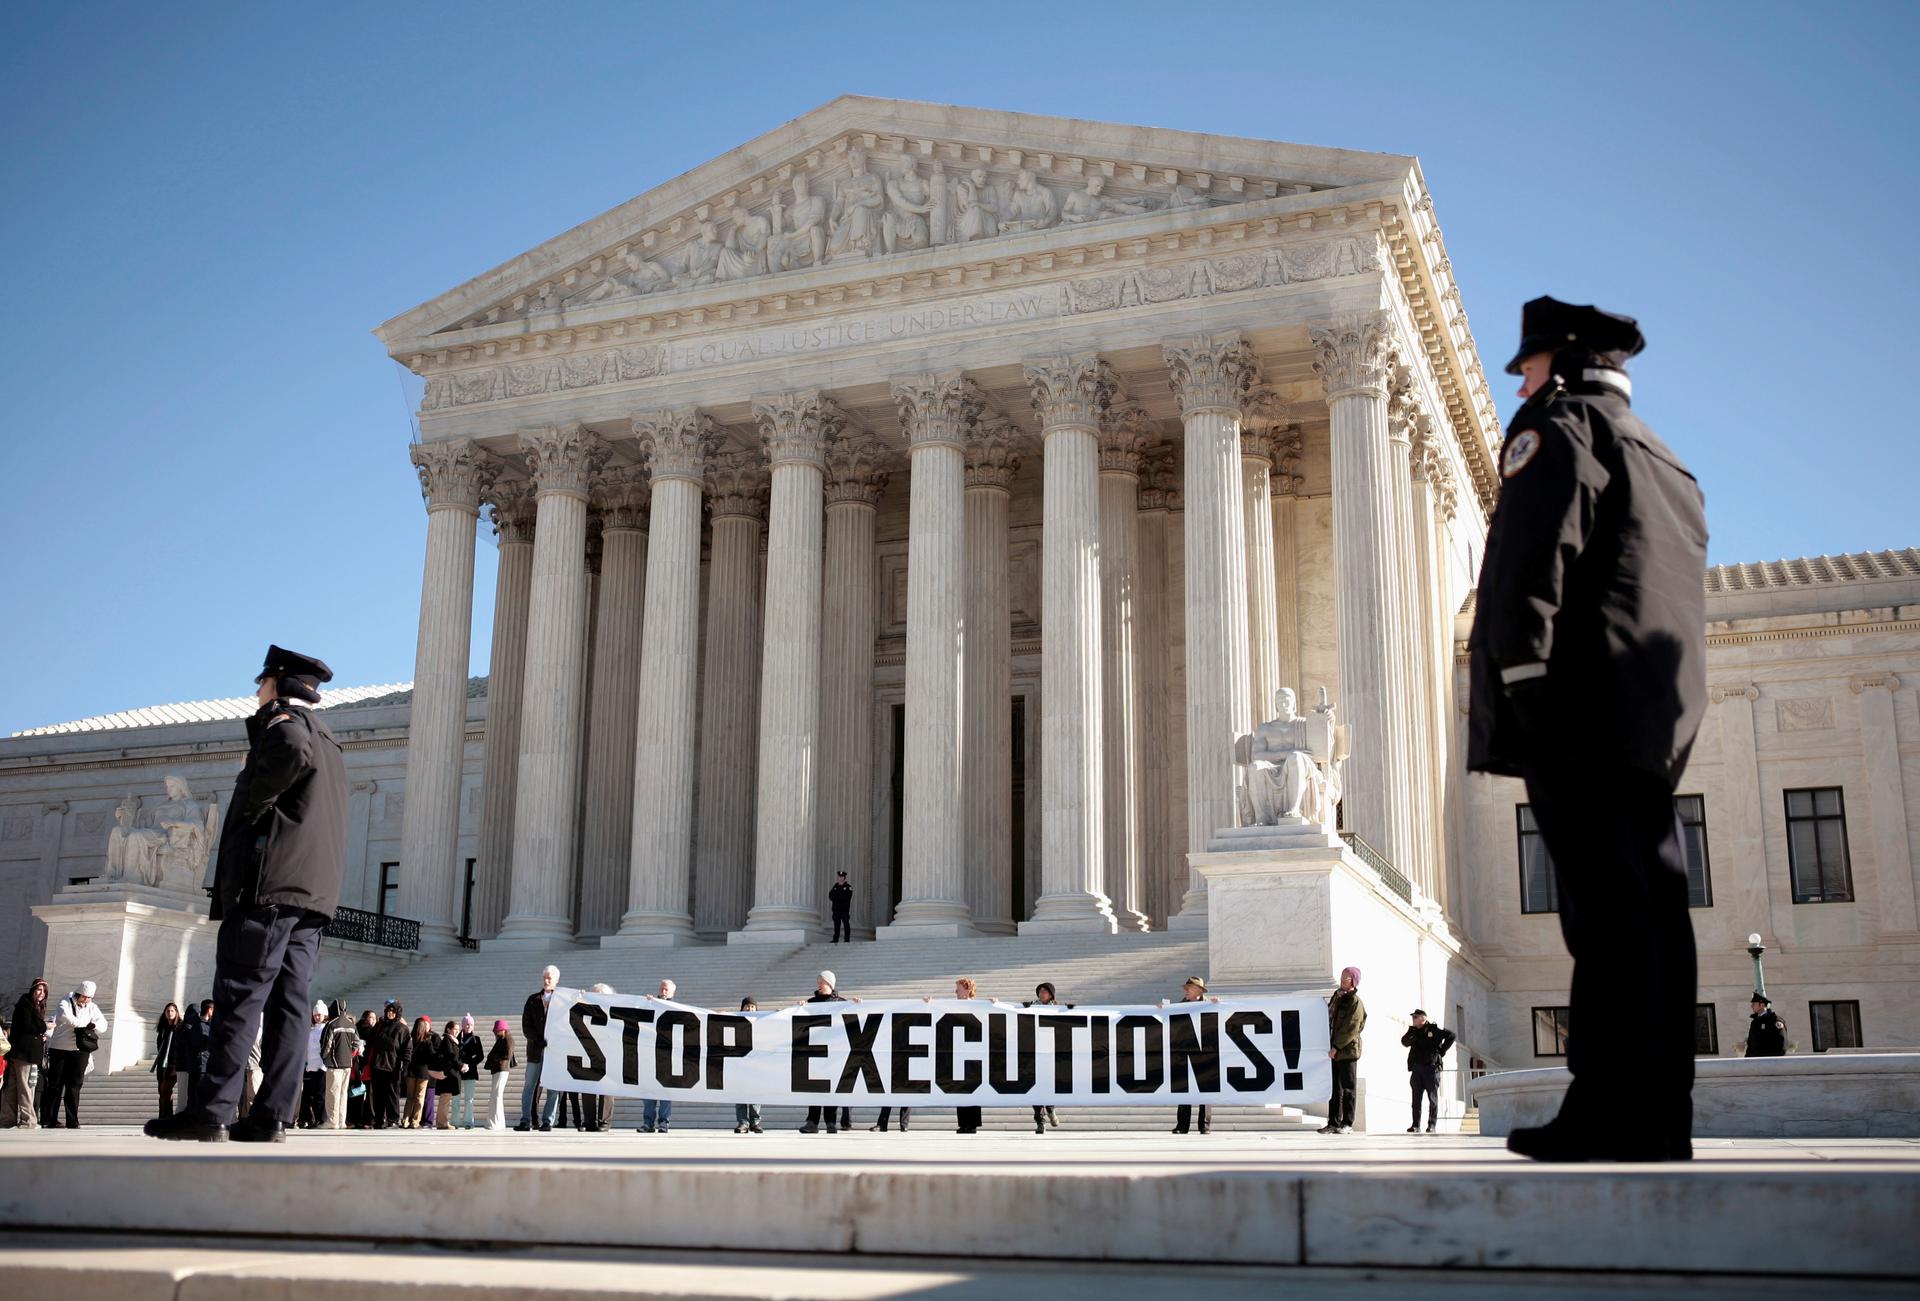 A panel protesting the death penalty is unfurled at the supreme court